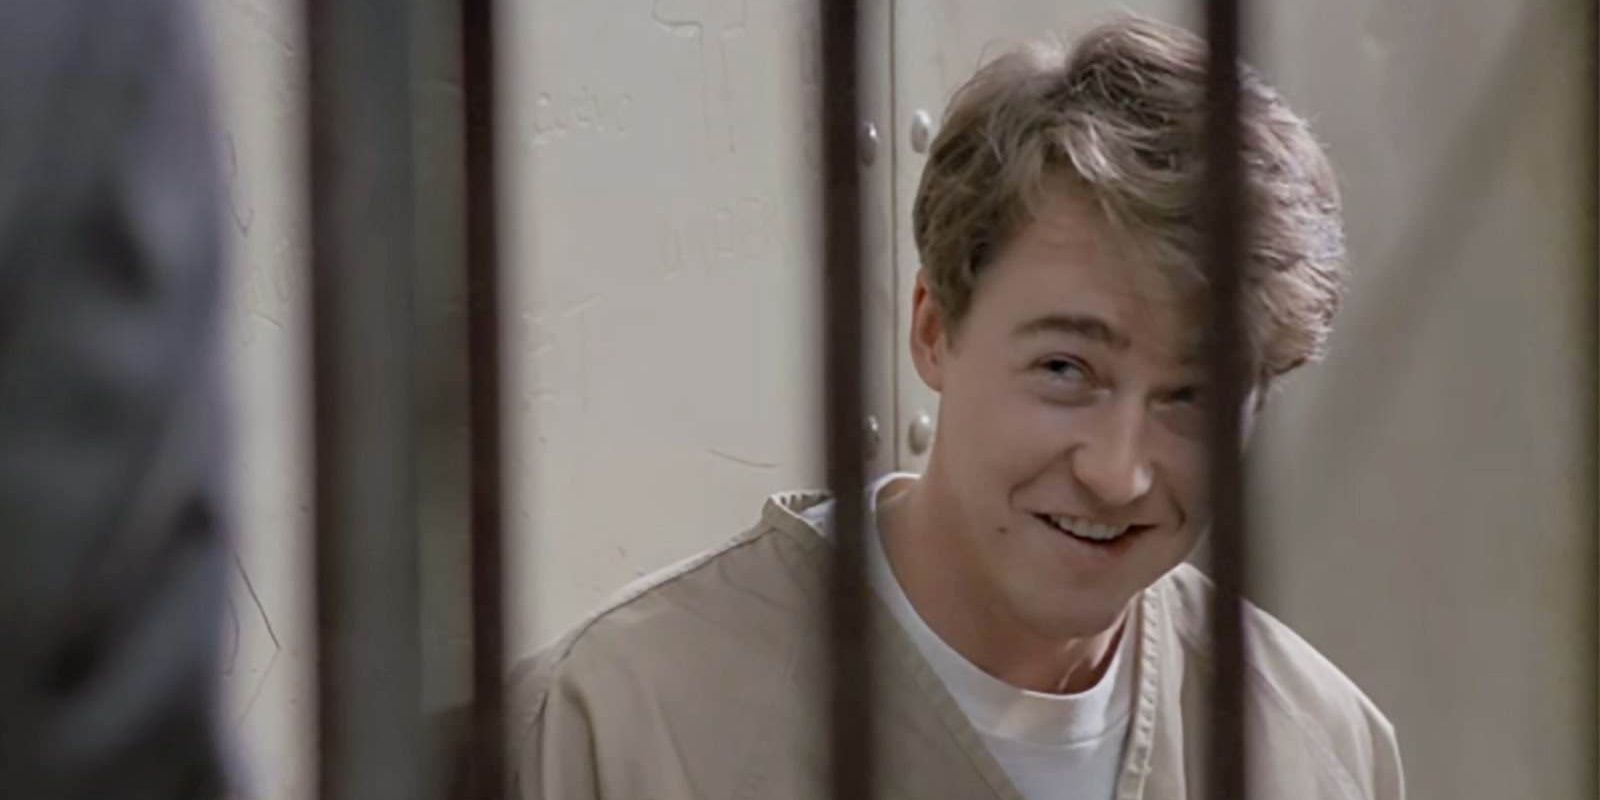 Edward Norton as Aaron/Roy smiling arrogantly in his jail cell in Primal Fear